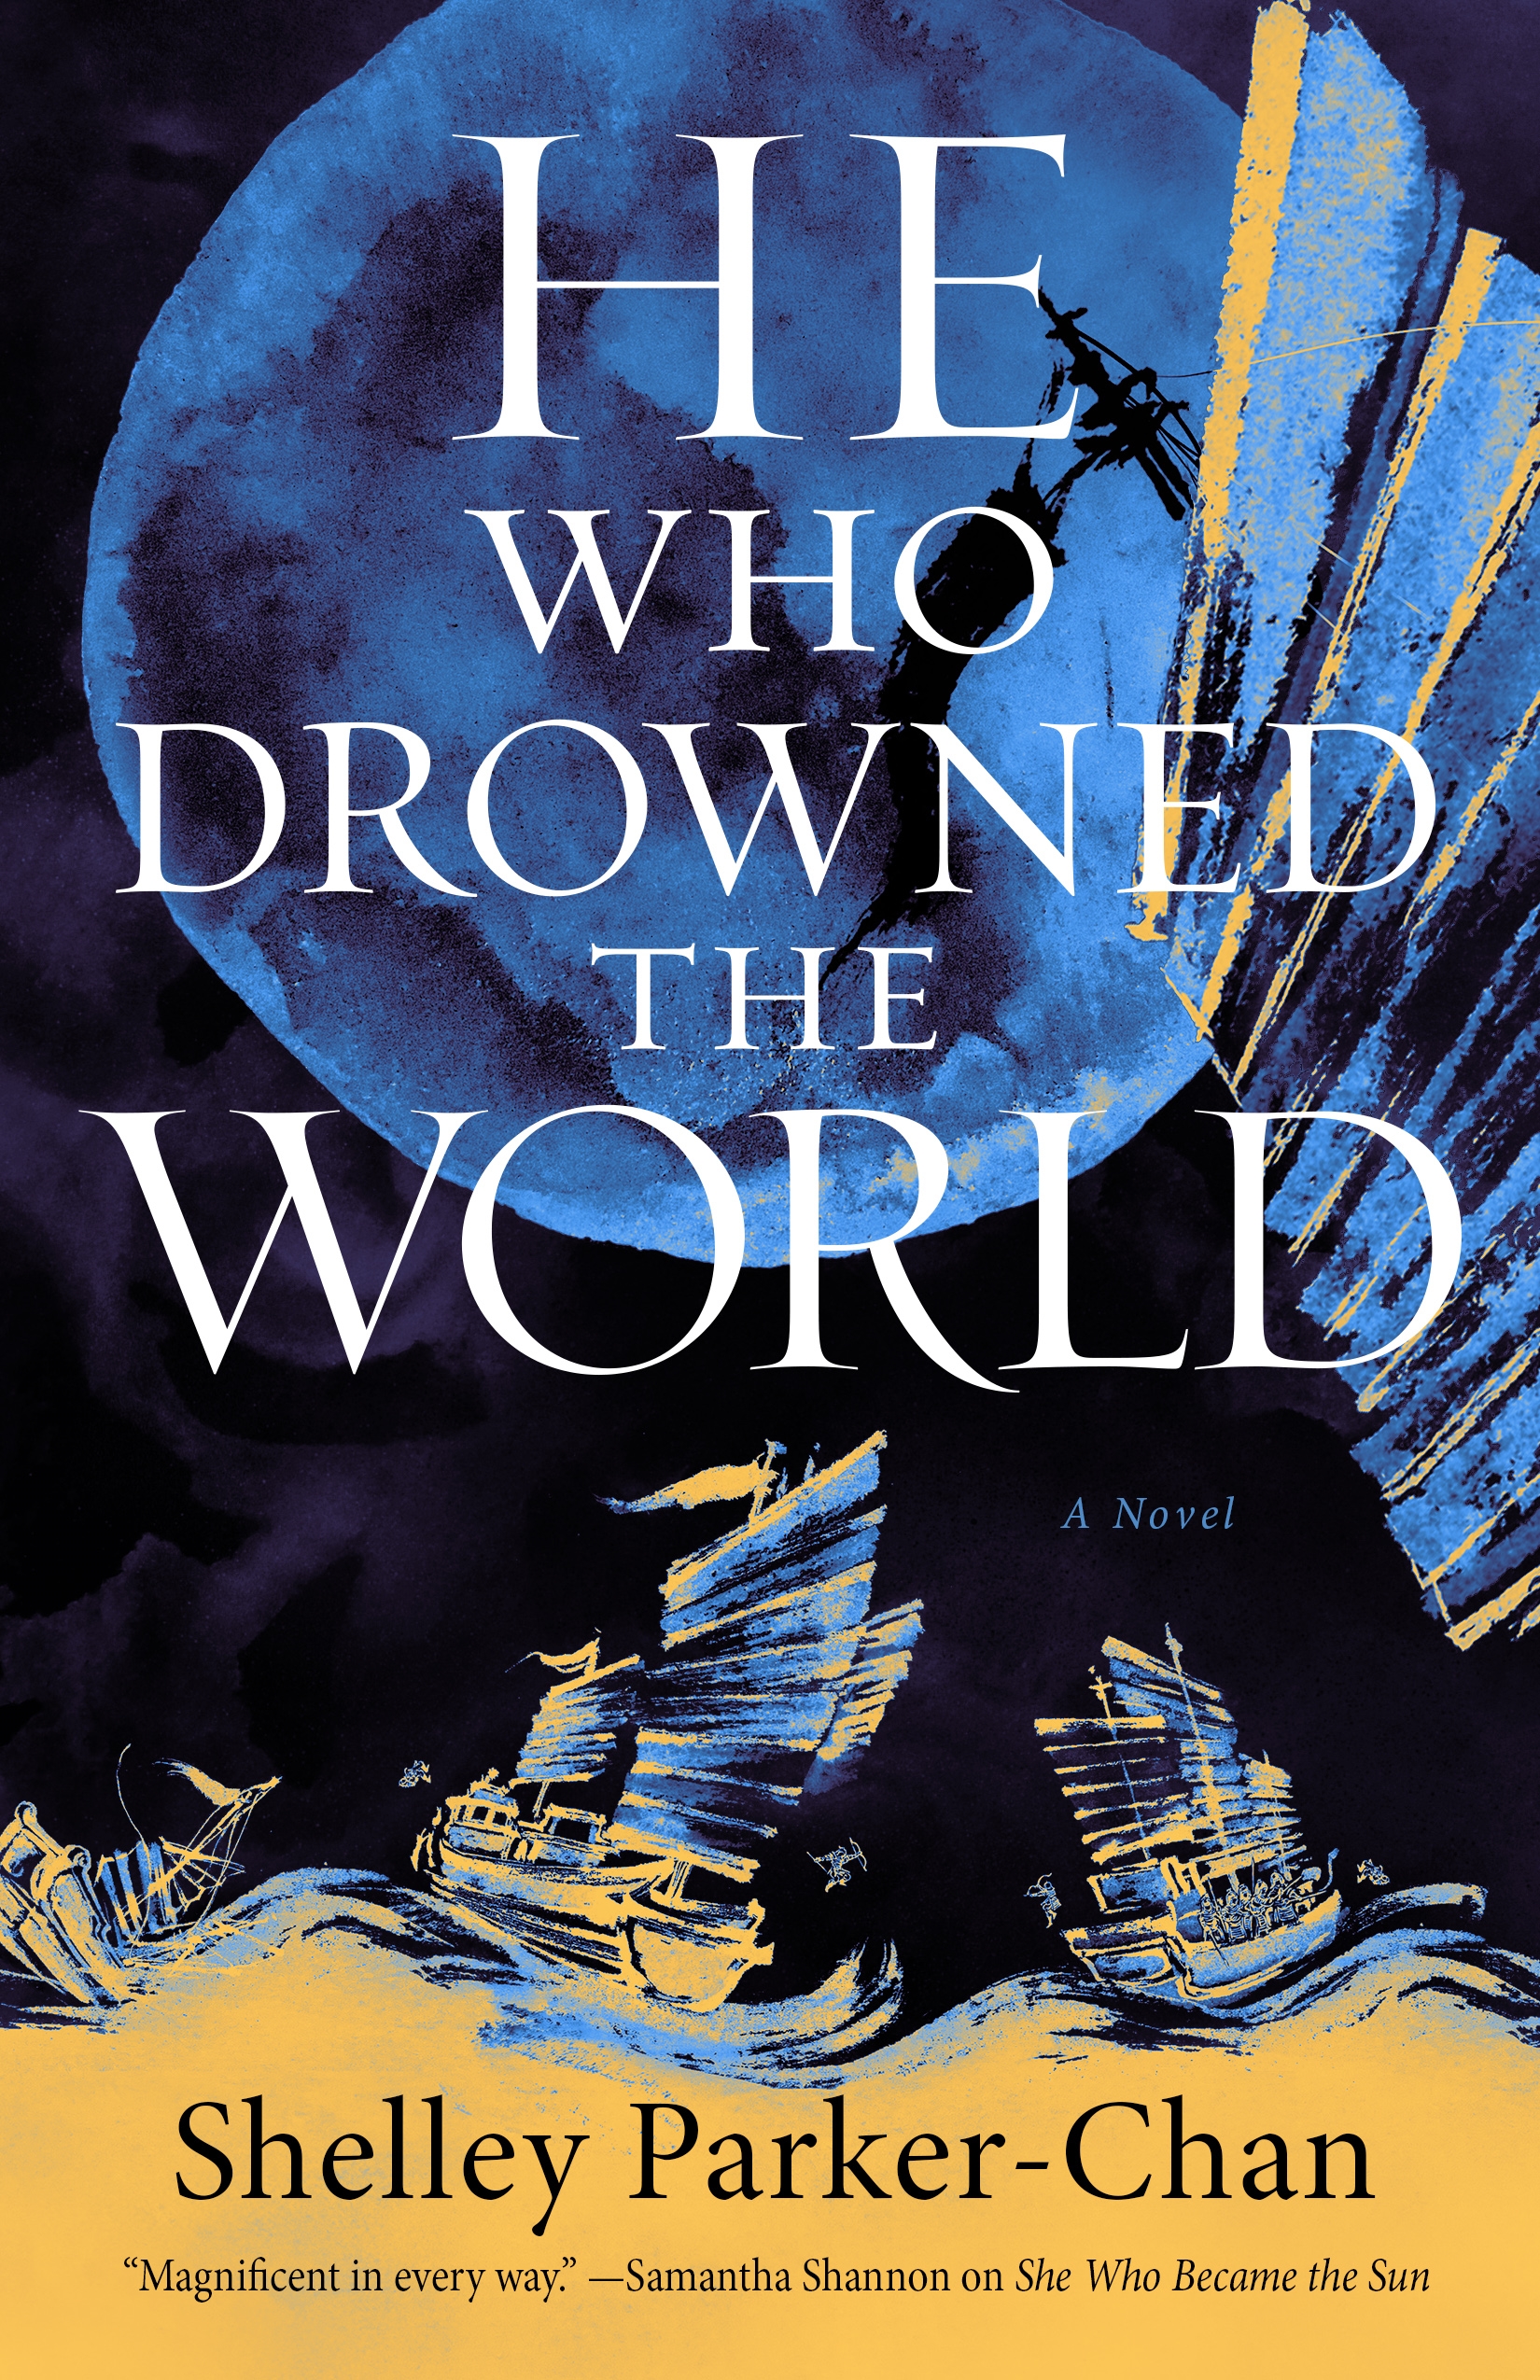 He Who Drowned the World : A Novel by Shelley Parker-Chan